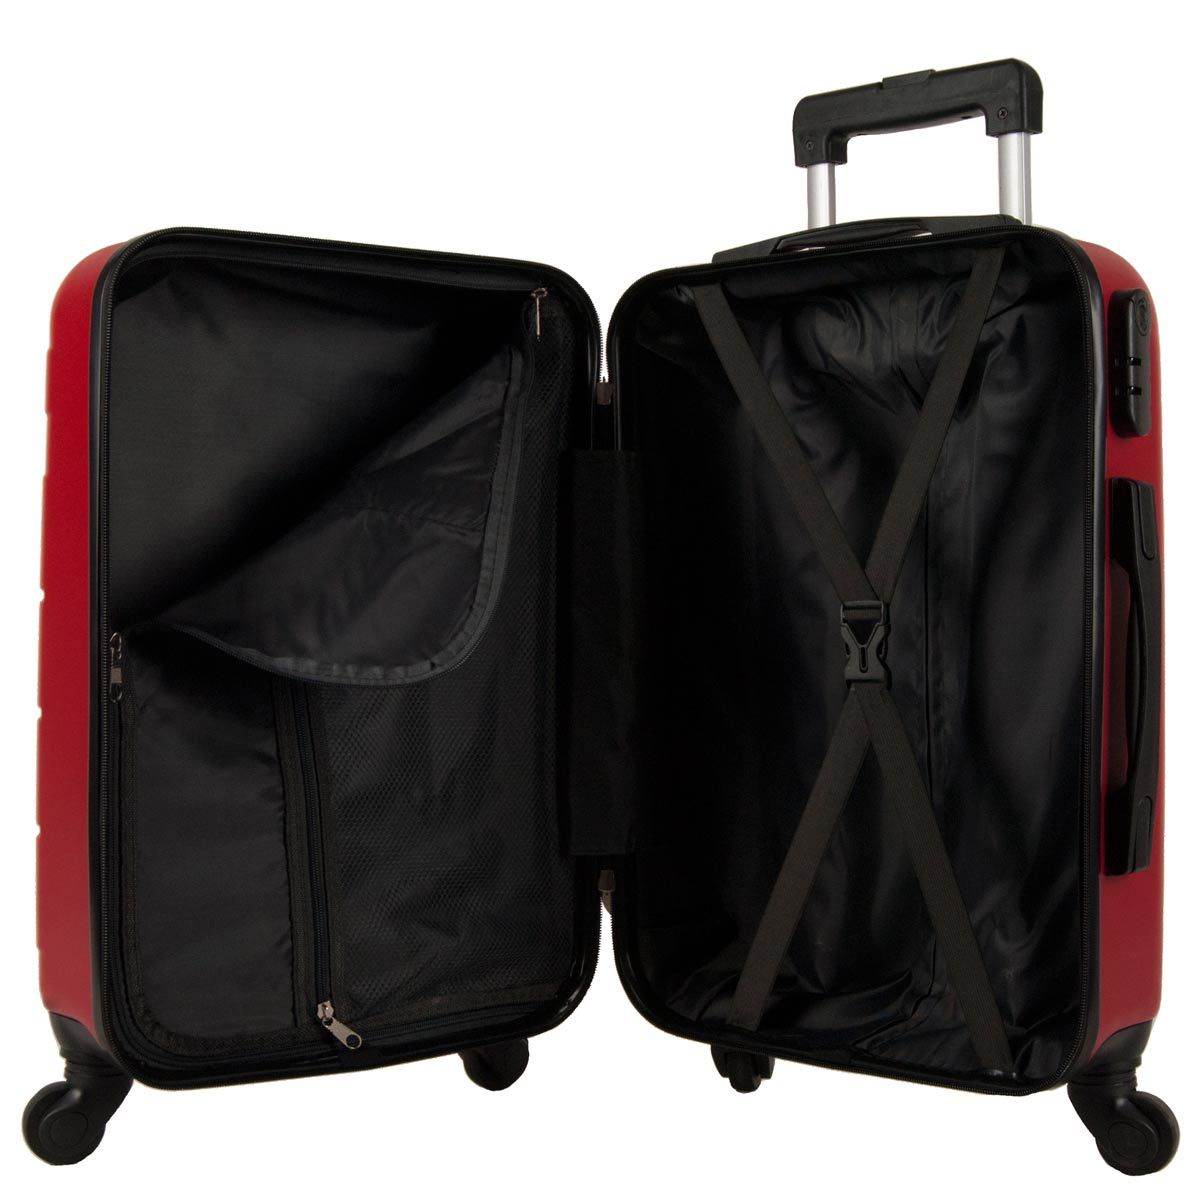 ABS suitcase, high quality and resistance. Approximate measures: 42 * 32 * 18 cm. This suitcase is made of acrylonitrile-styrene-butadiene, a high-impact polymer that is used in difficult cases due to its greater resistance. It is a light resin material that is less spider. It is, therefore, a very resistant plastic that can be manufactured in different finishes, colors and shapes. This ABS suitcase use zipper lock by combination, through a numeric combination that only your will, which gives you great security to your luggage. The zipper is surrounded by a rubber coating, as a protection. We commented on some of its benefits: they are hard, they are resistant to blows, they are resistant to abrasion, they are light and granted less than other types of suitcases. This suitcase has an exclusive and original design, consist of the Spinner Trolley system to make it more comfortable and easy to transport, with its 4 revolving and silent double wheels. In addition, it has a trailer system with ergonomic handle and push button, and a higher handle in 2 positions. Inside consists of two departments, one of them with zip pocket. Outside, on one side, it has 4 support points to place the suitcase horizontally, easily, besides two flexible handles at the top and lateral.